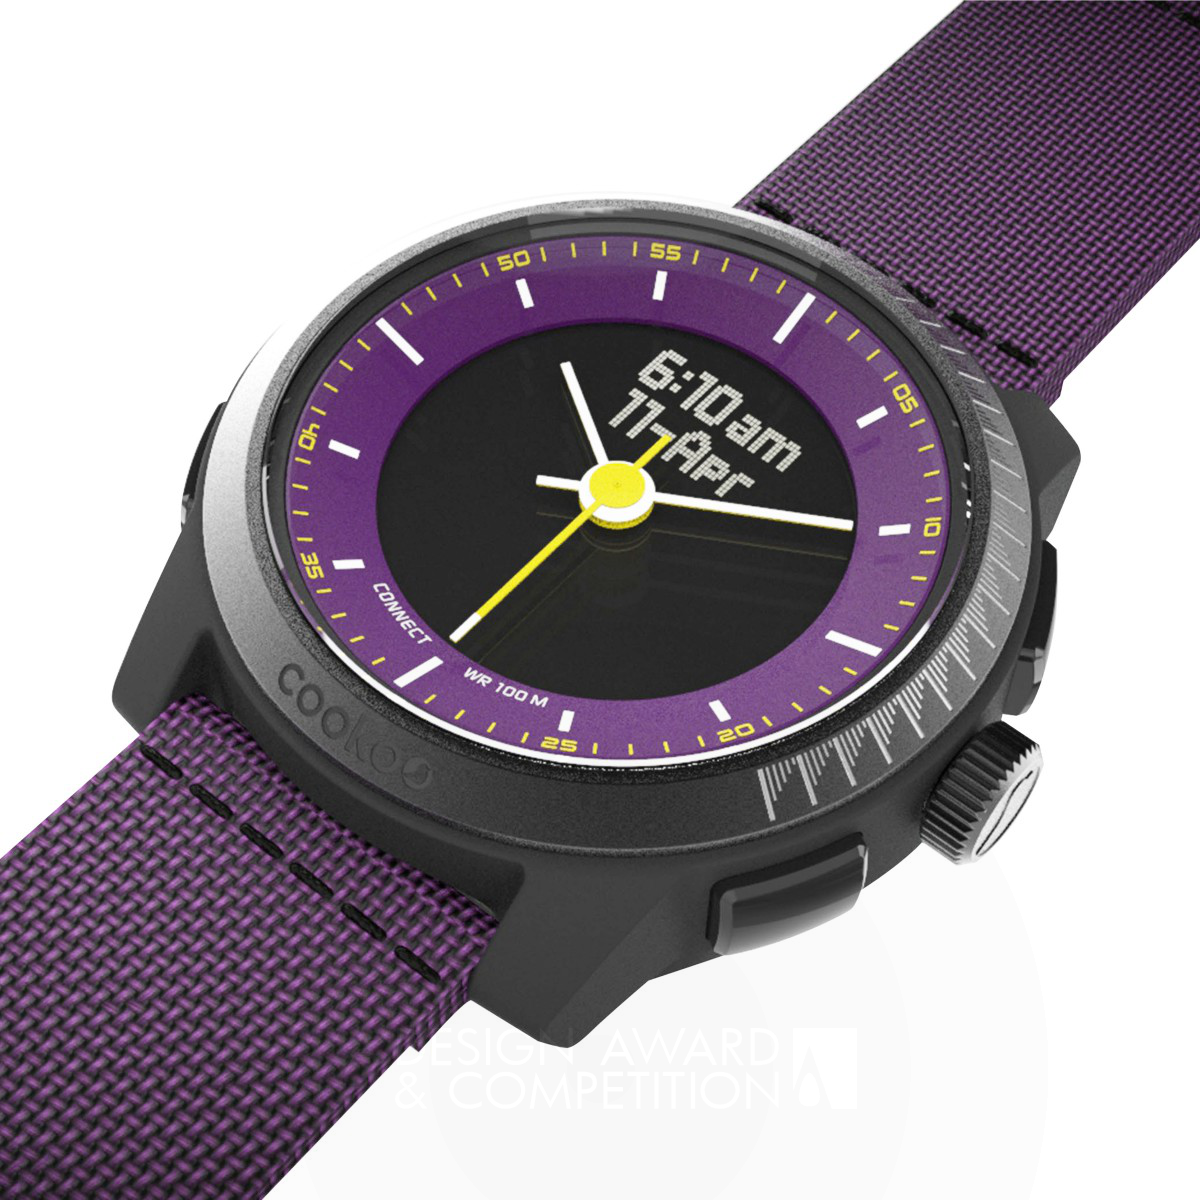 COOKOO 2.0 <b>Bluetooth Connected Watch